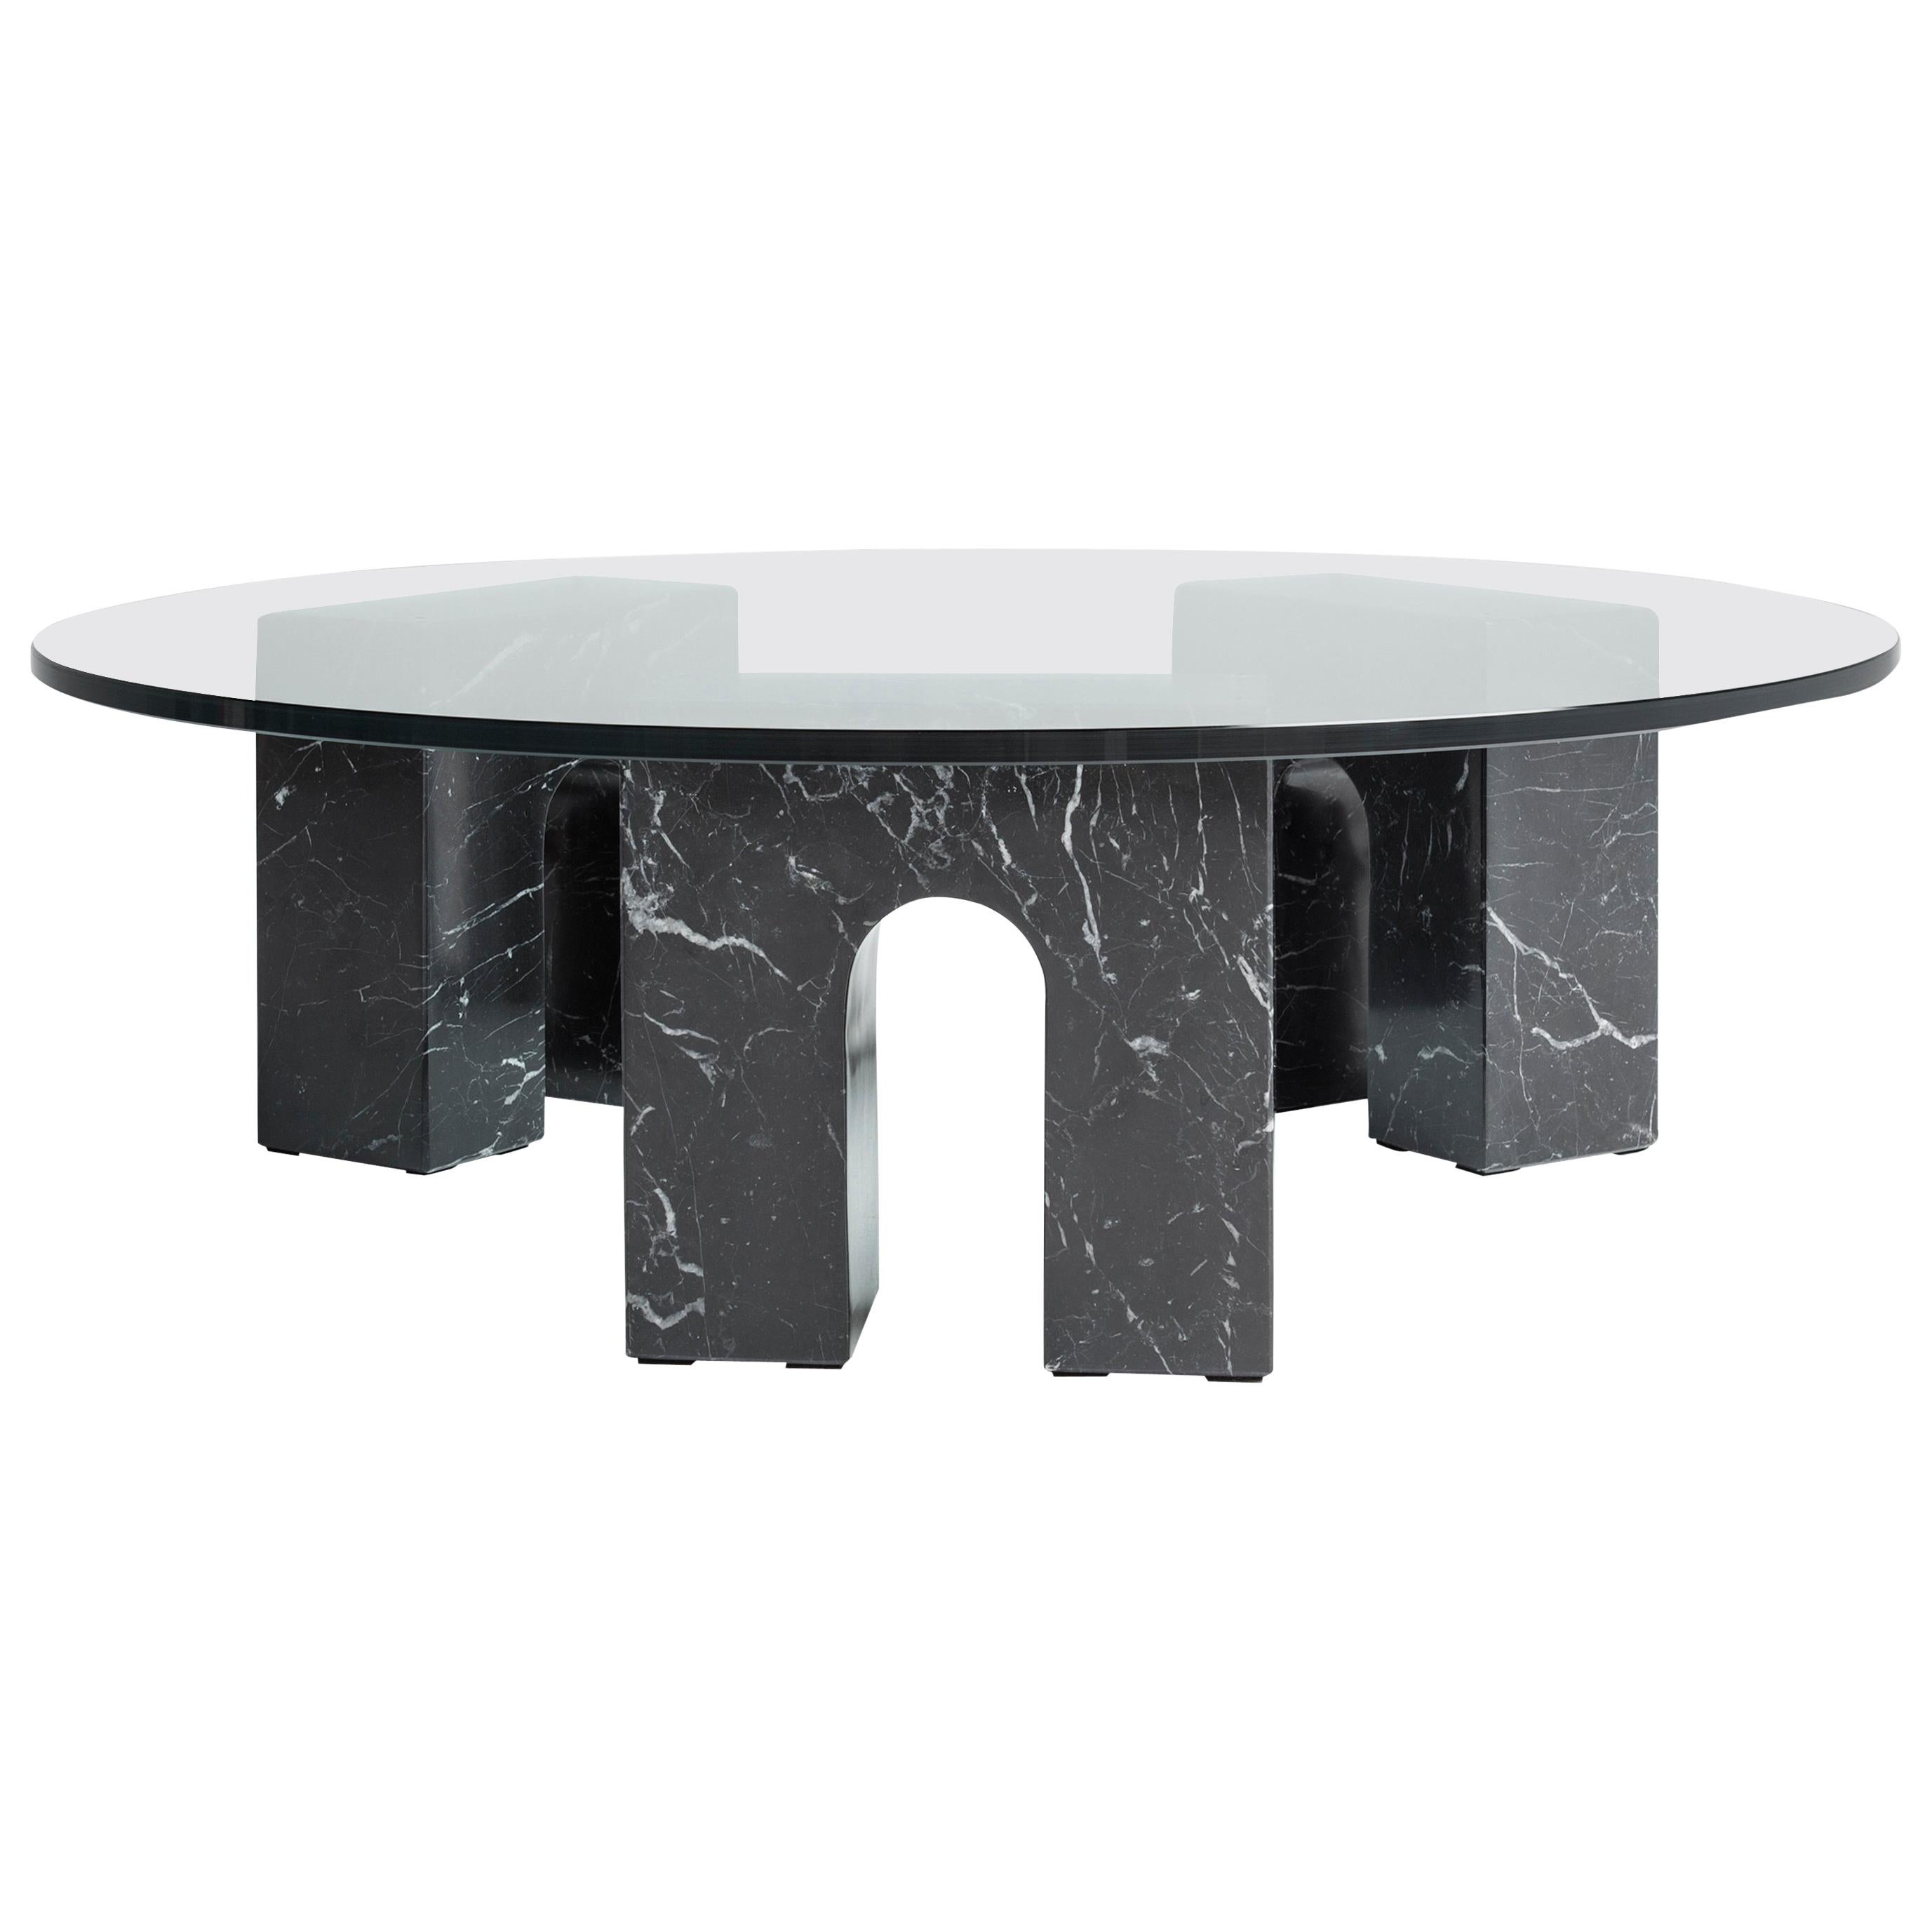 “Arch Table” Minimalist Marquina Marble and Glass Coffee Table by Aparentment